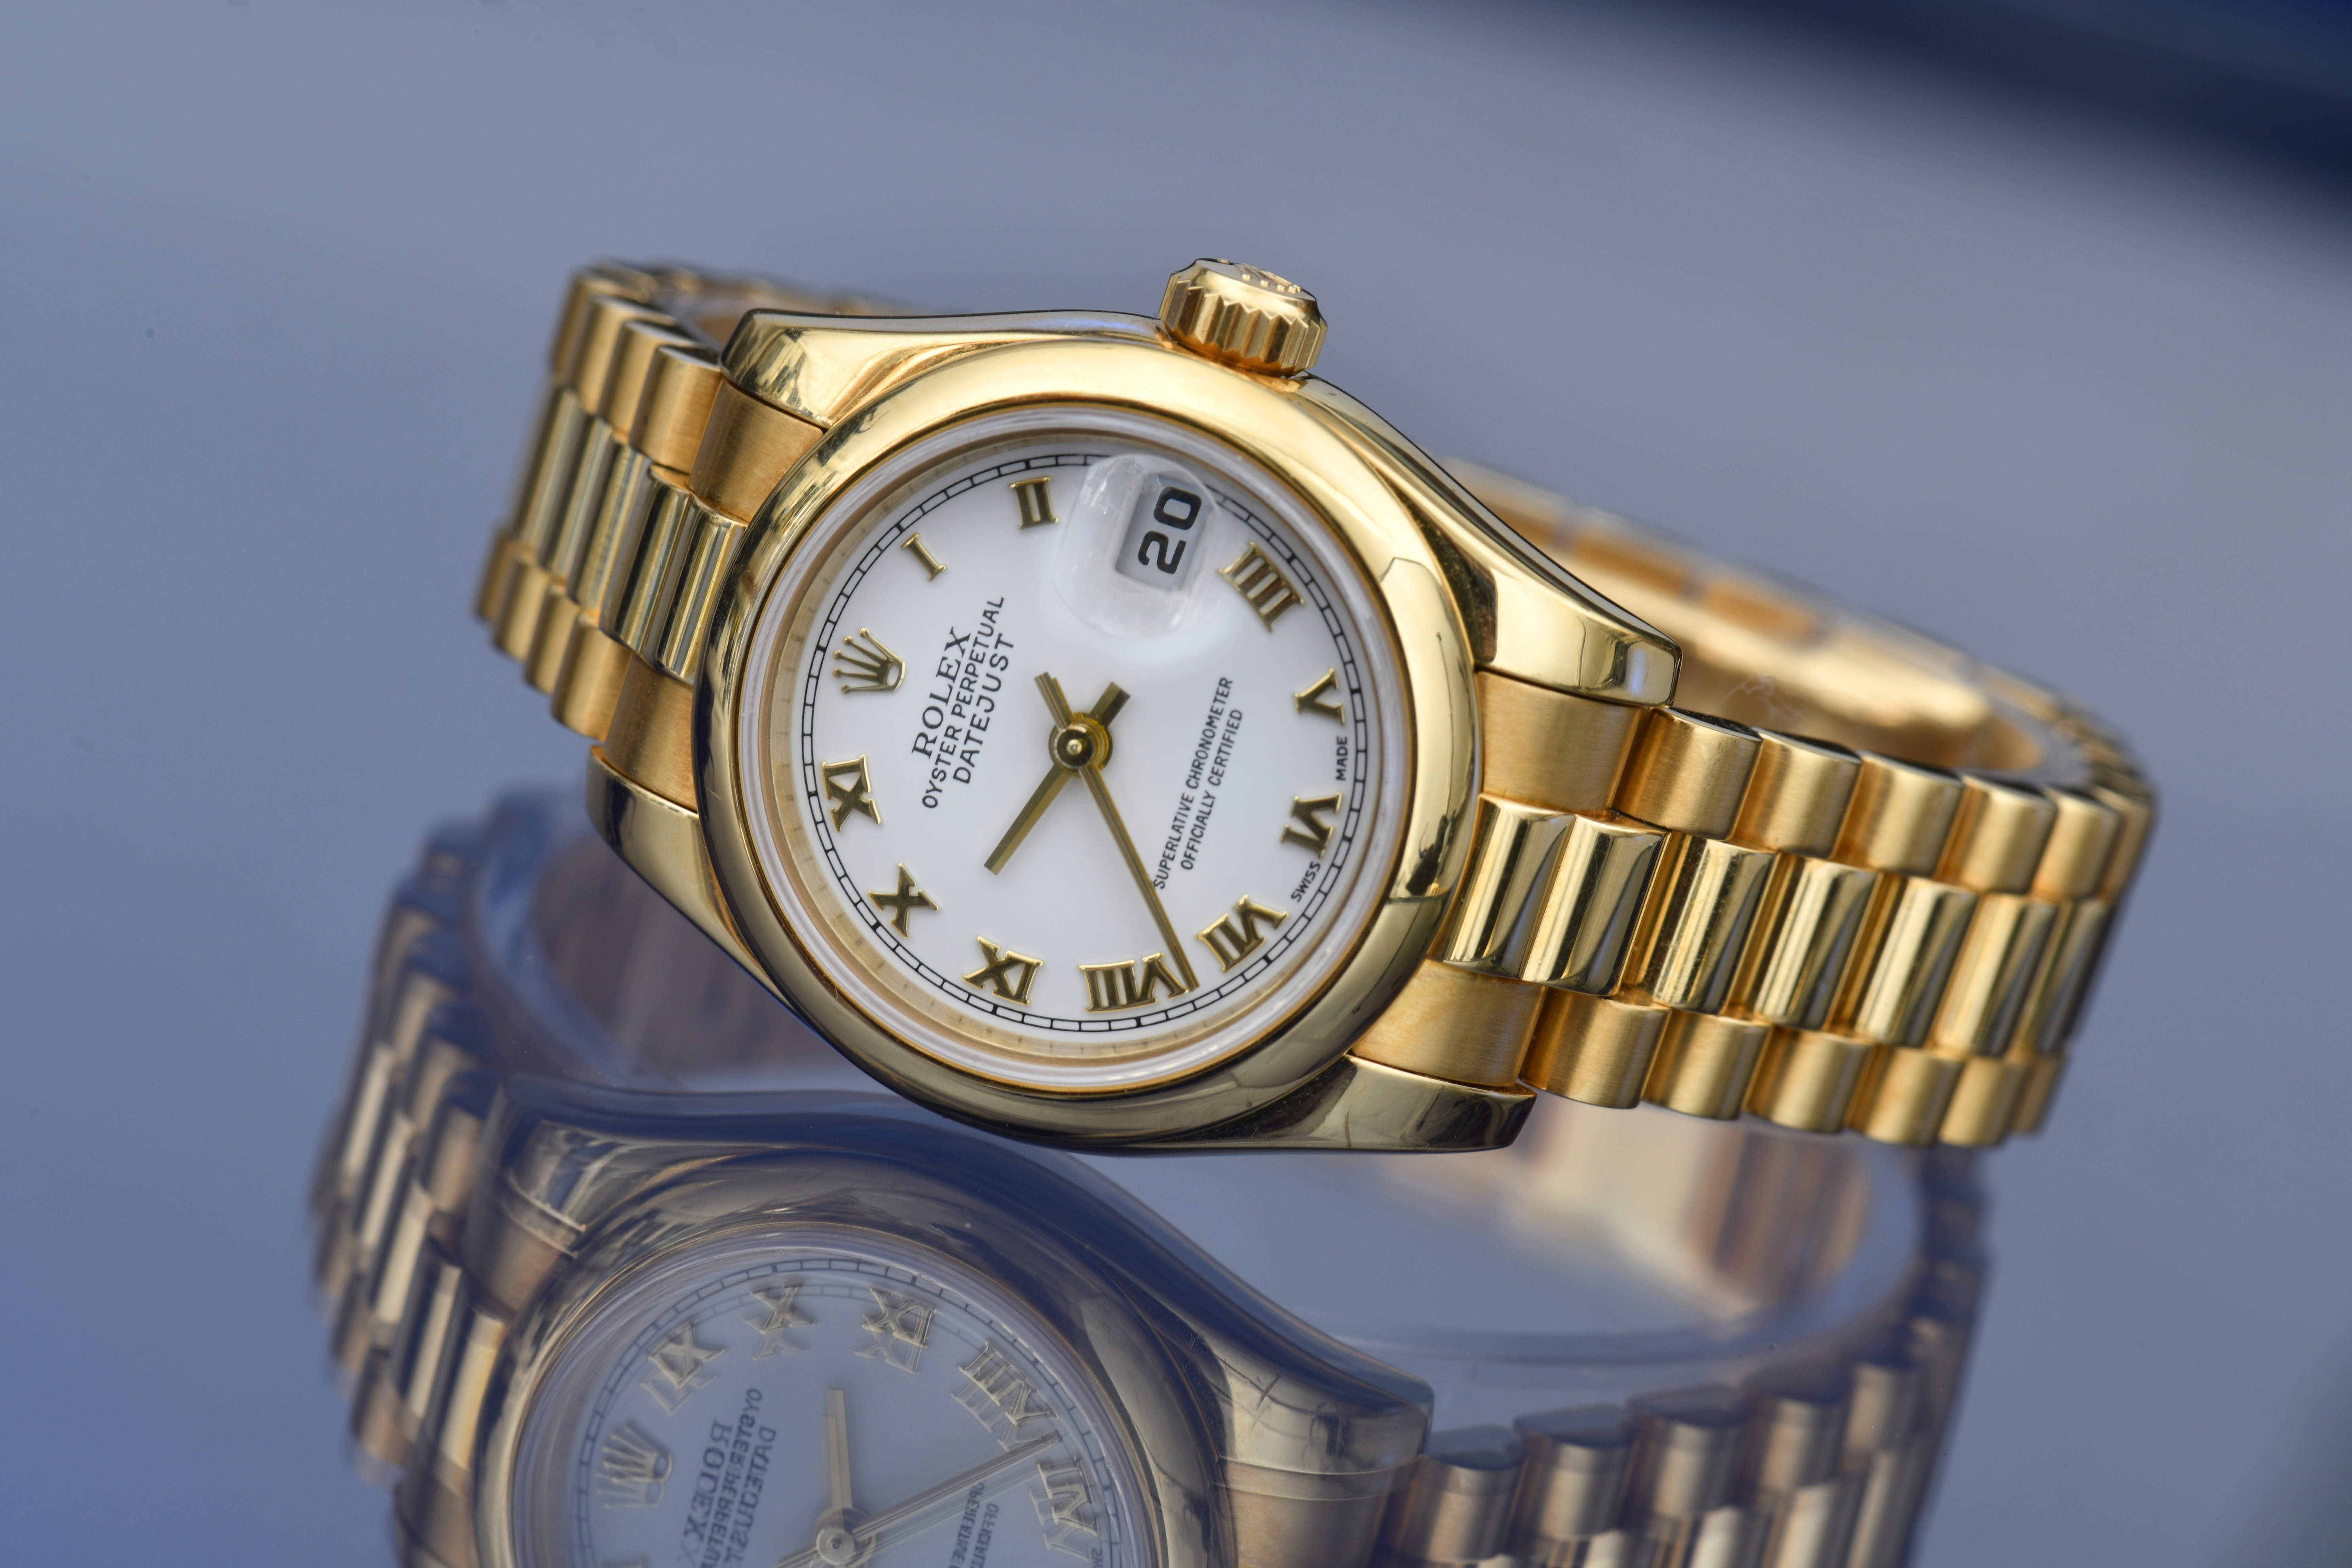 Rolex Oyster Perpetual Datejust 18ct gold ladies automatic wristwatch ref. 179168 with date - Image 4 of 4